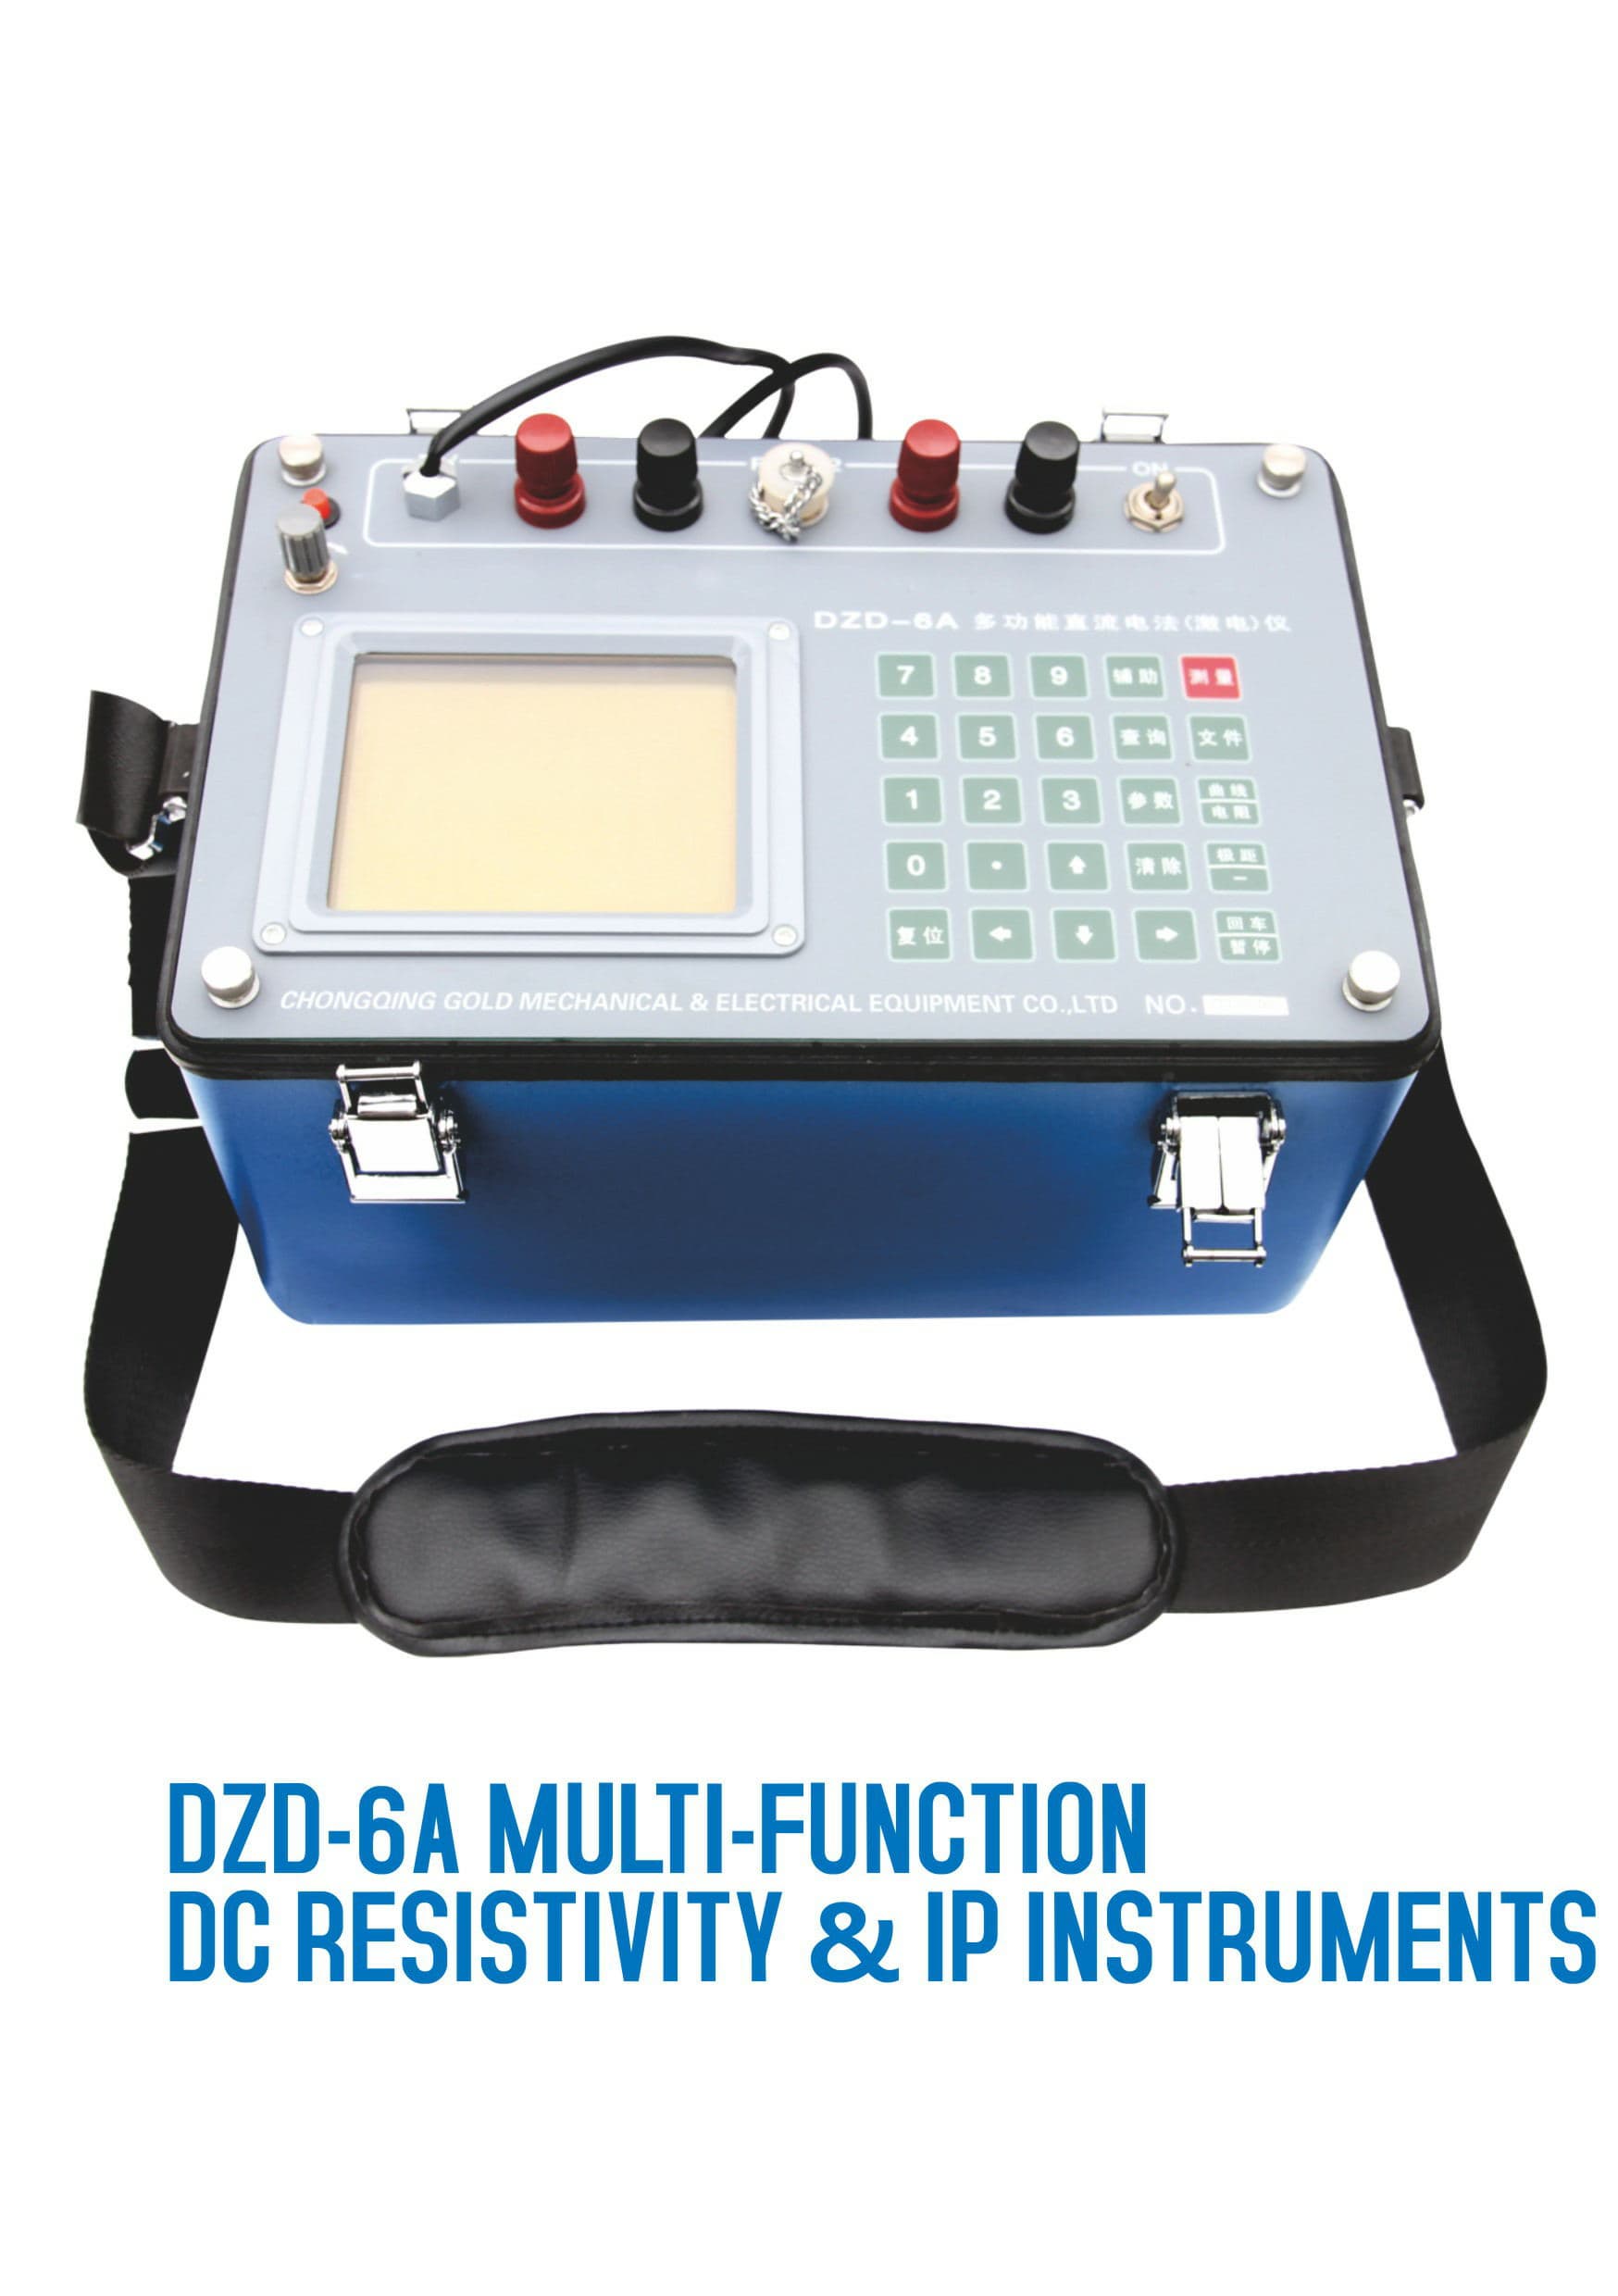 DZD-6A Multi-Function DC Resistivity & IP